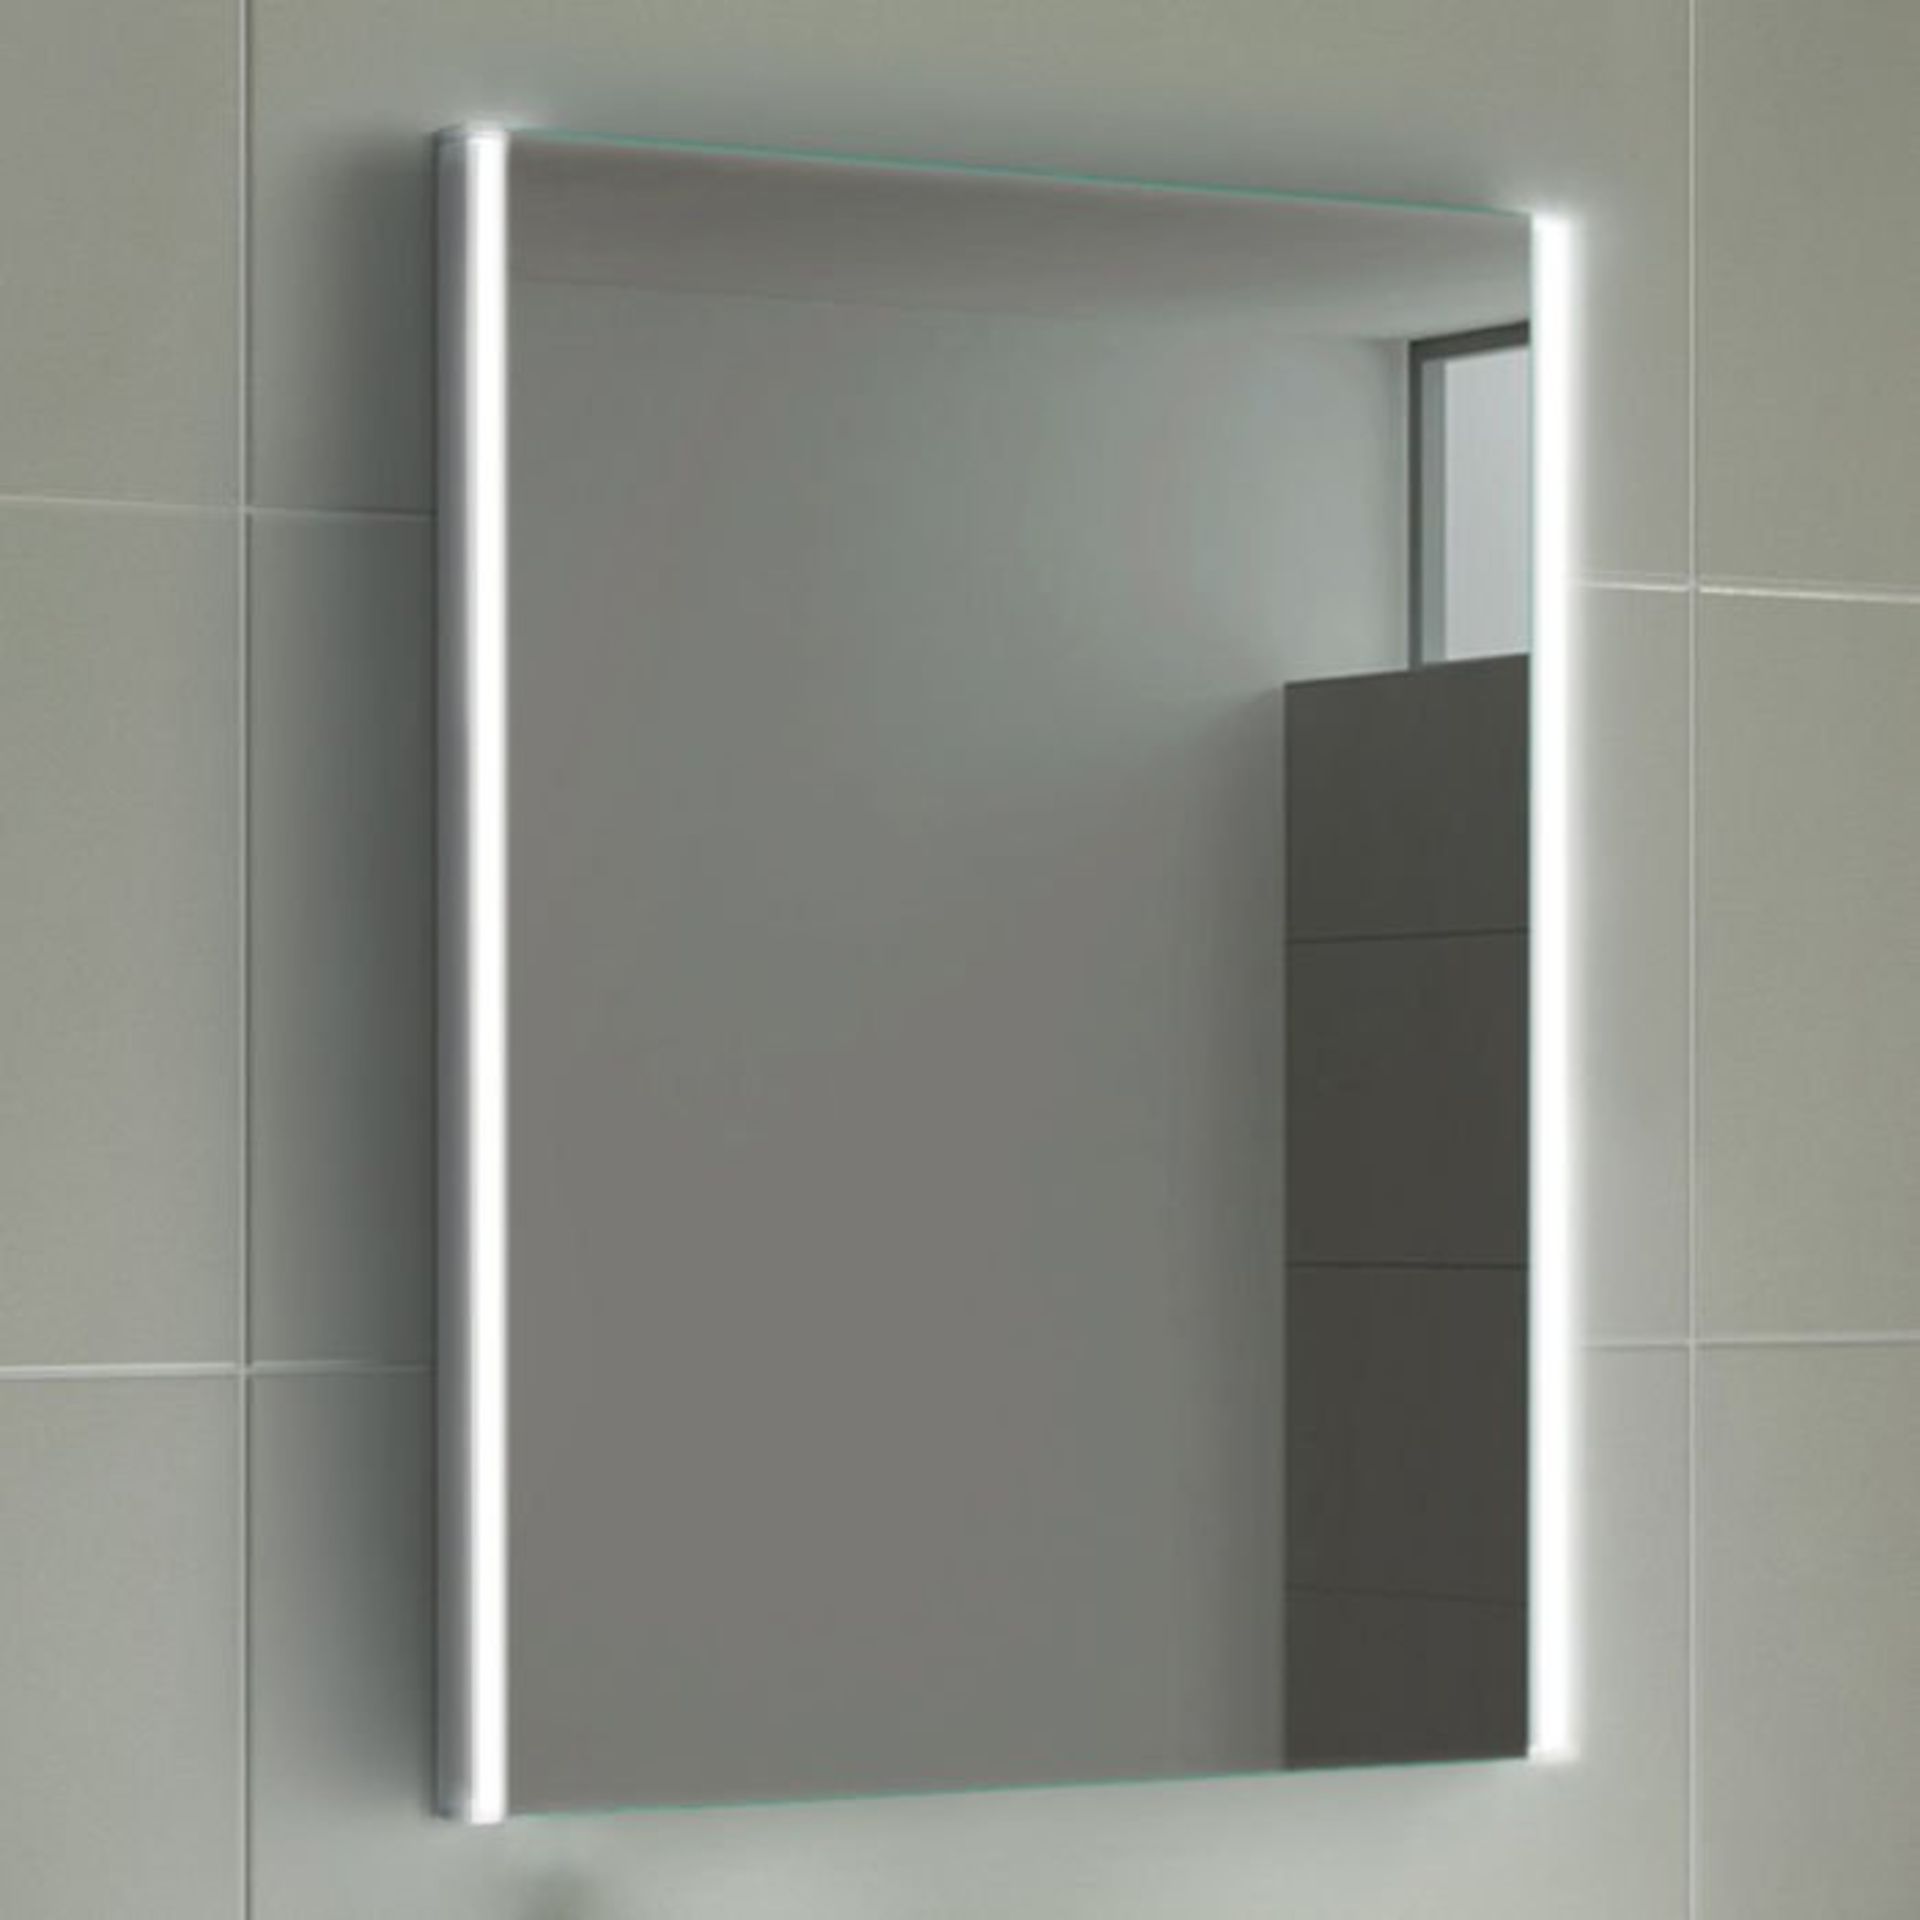 (L206) 450x600mm Lunar Illuminated LED Mirror. RRP £324.99. Energy efficient LED lighting with